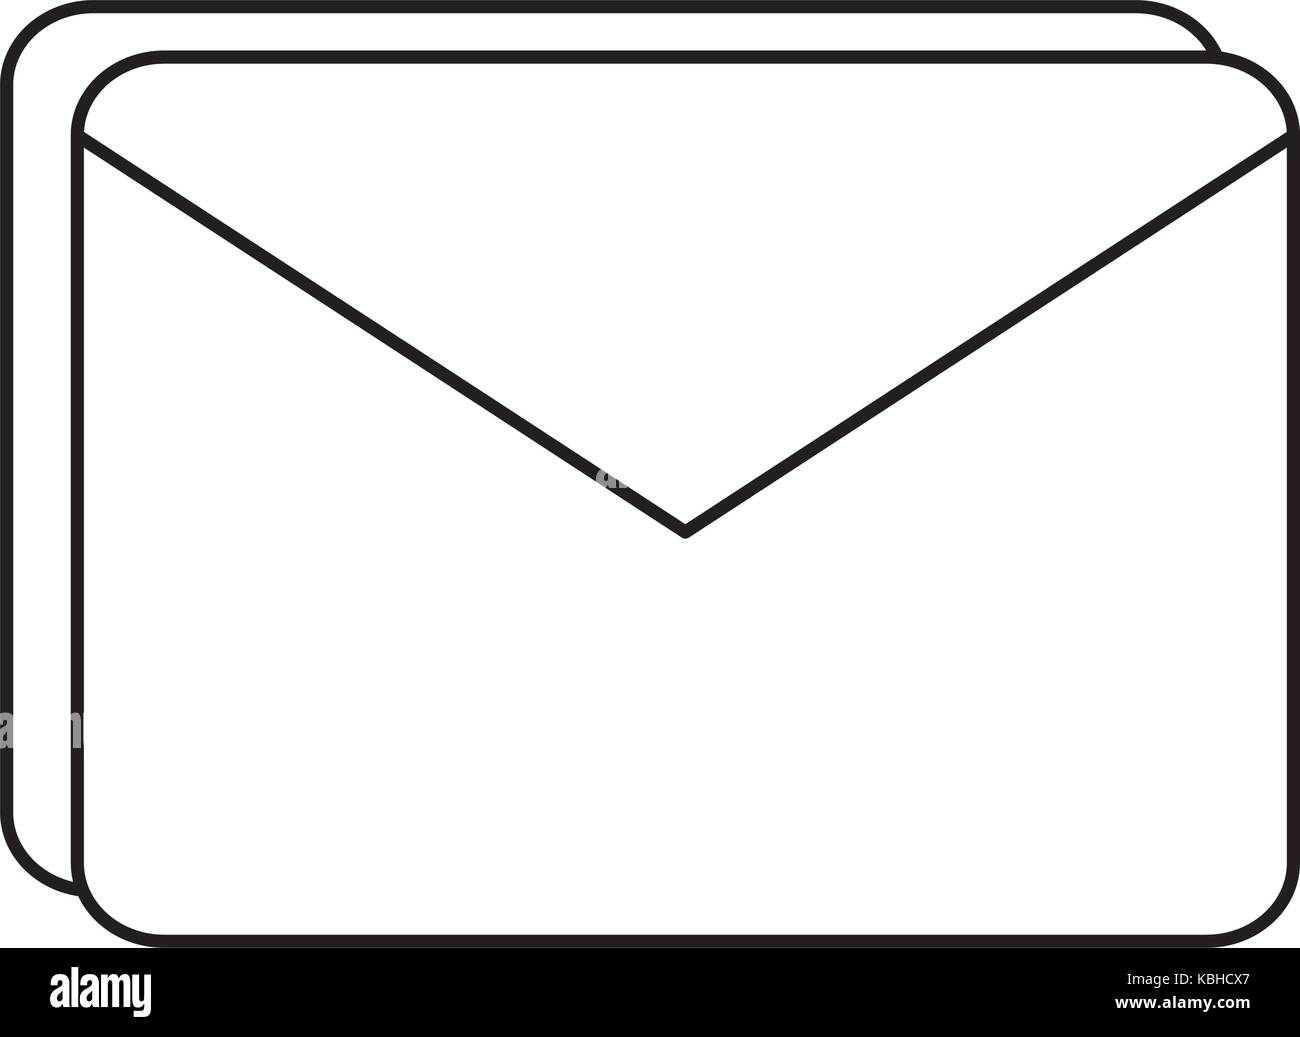 uncolored  envelope over white  background  vector illustration Stock Vector